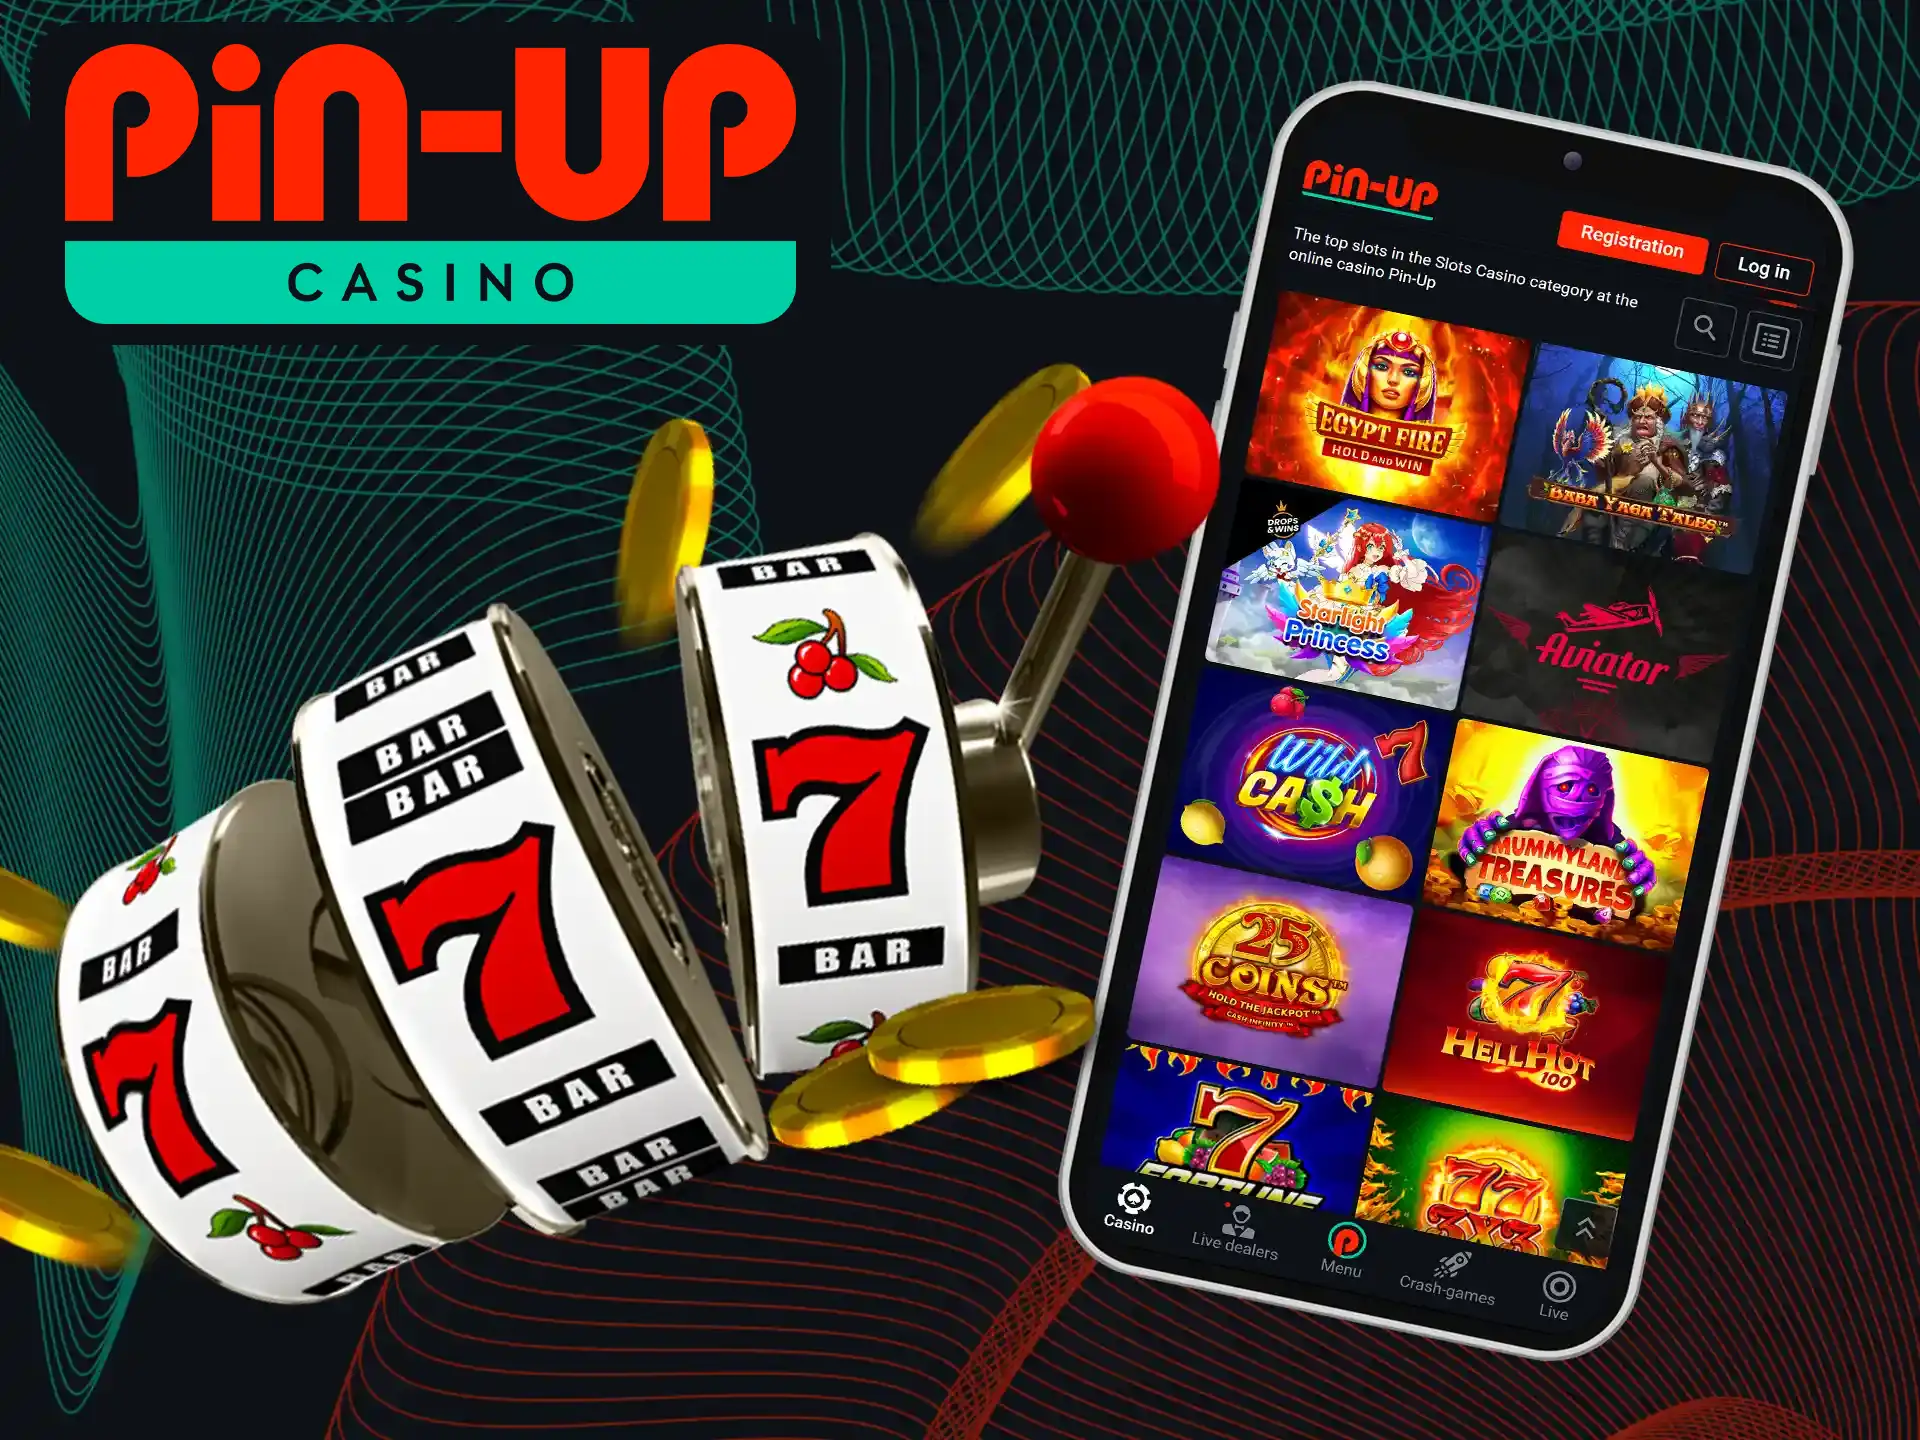 Among newcomers at Pin-Up Casino, slots are the most favored choice for entertainment.